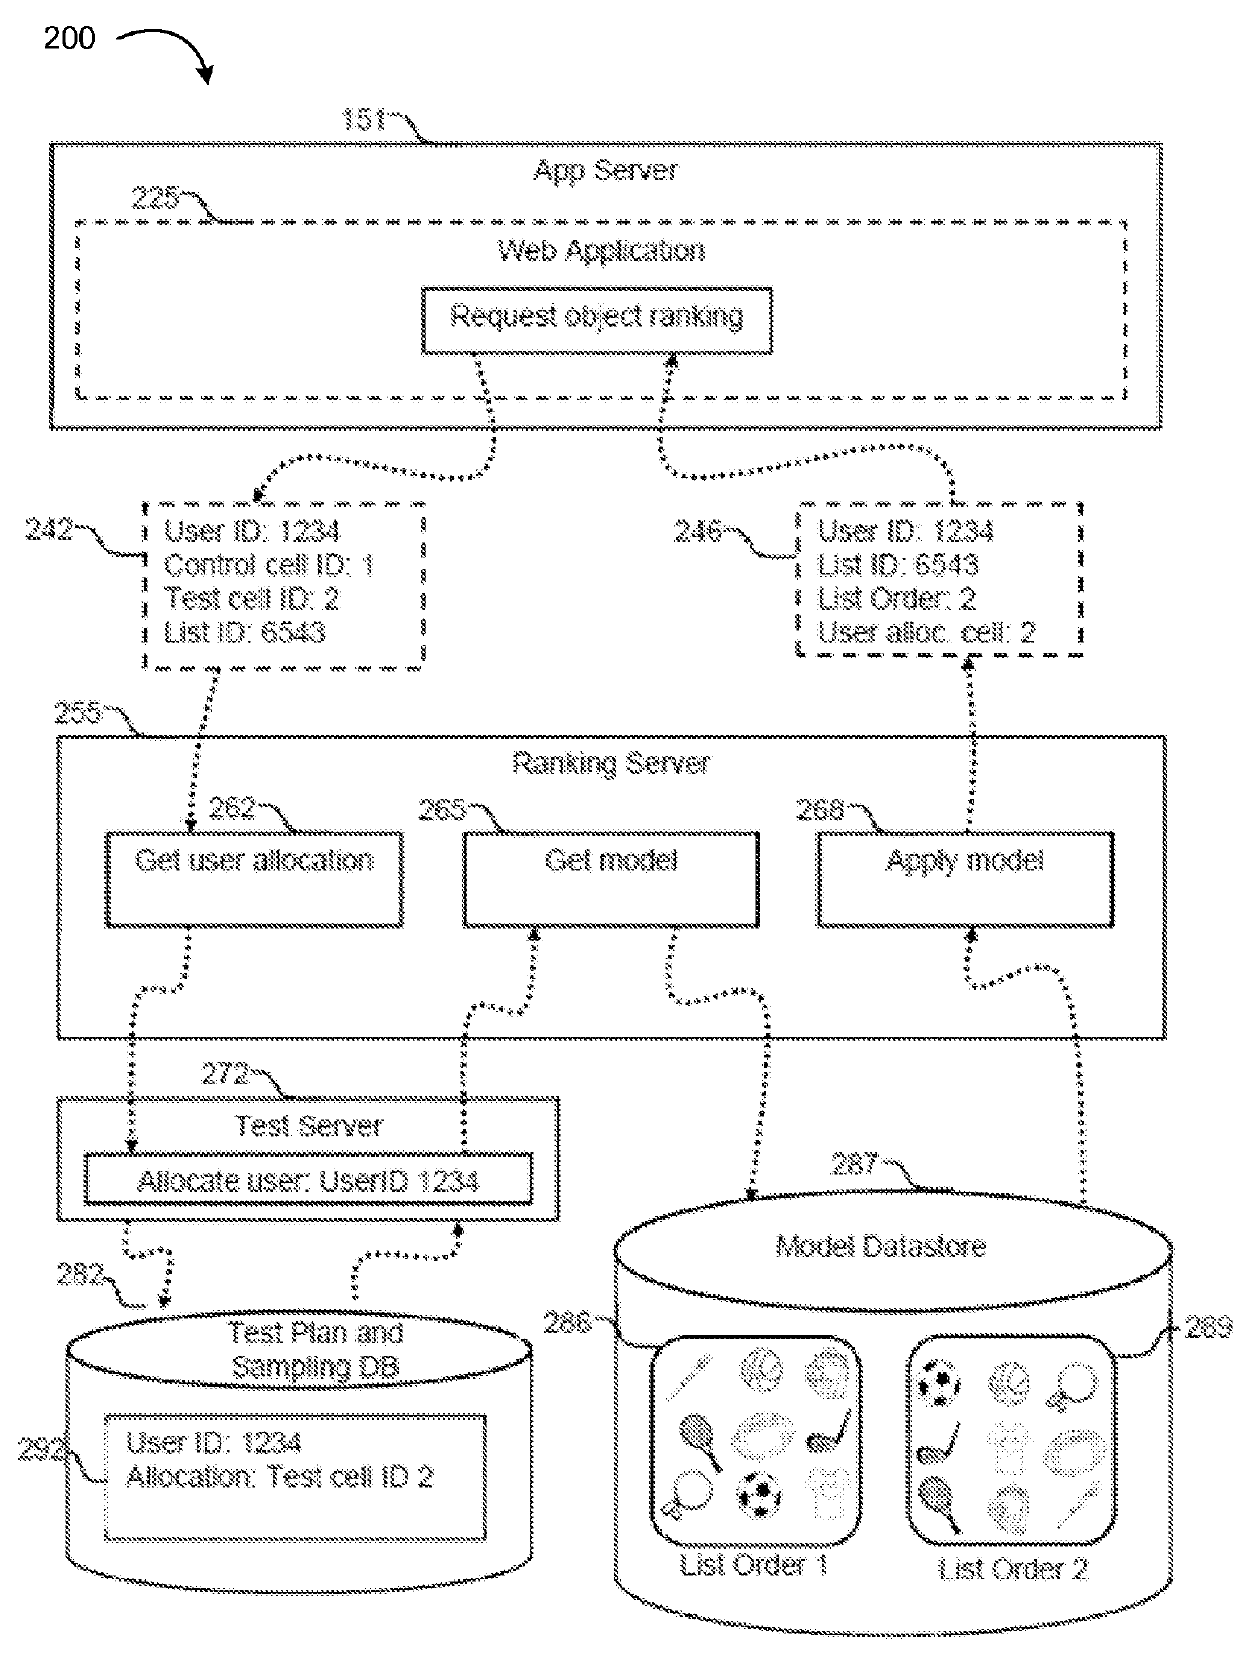 Testing of and adapting to user responses to web applications